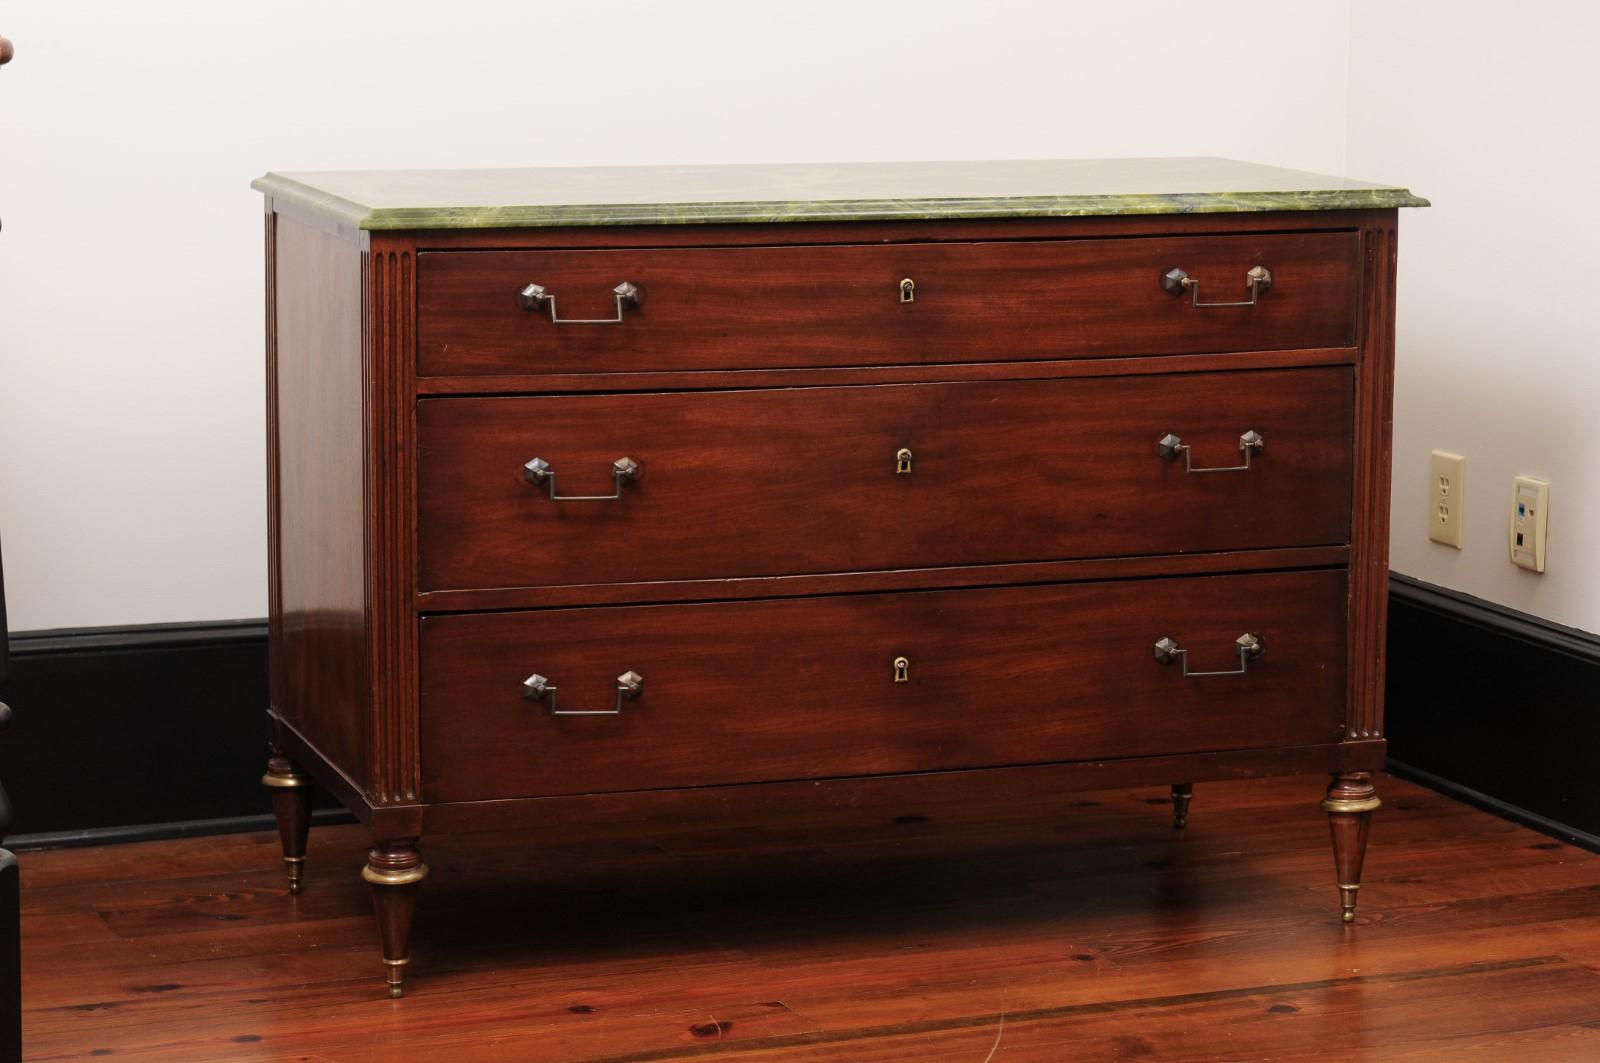 An antique classical-style chest. A green marble top rests on the mahogany case that features 3 drawers. Fluted columns on the sides of the case taper into pointed feet.